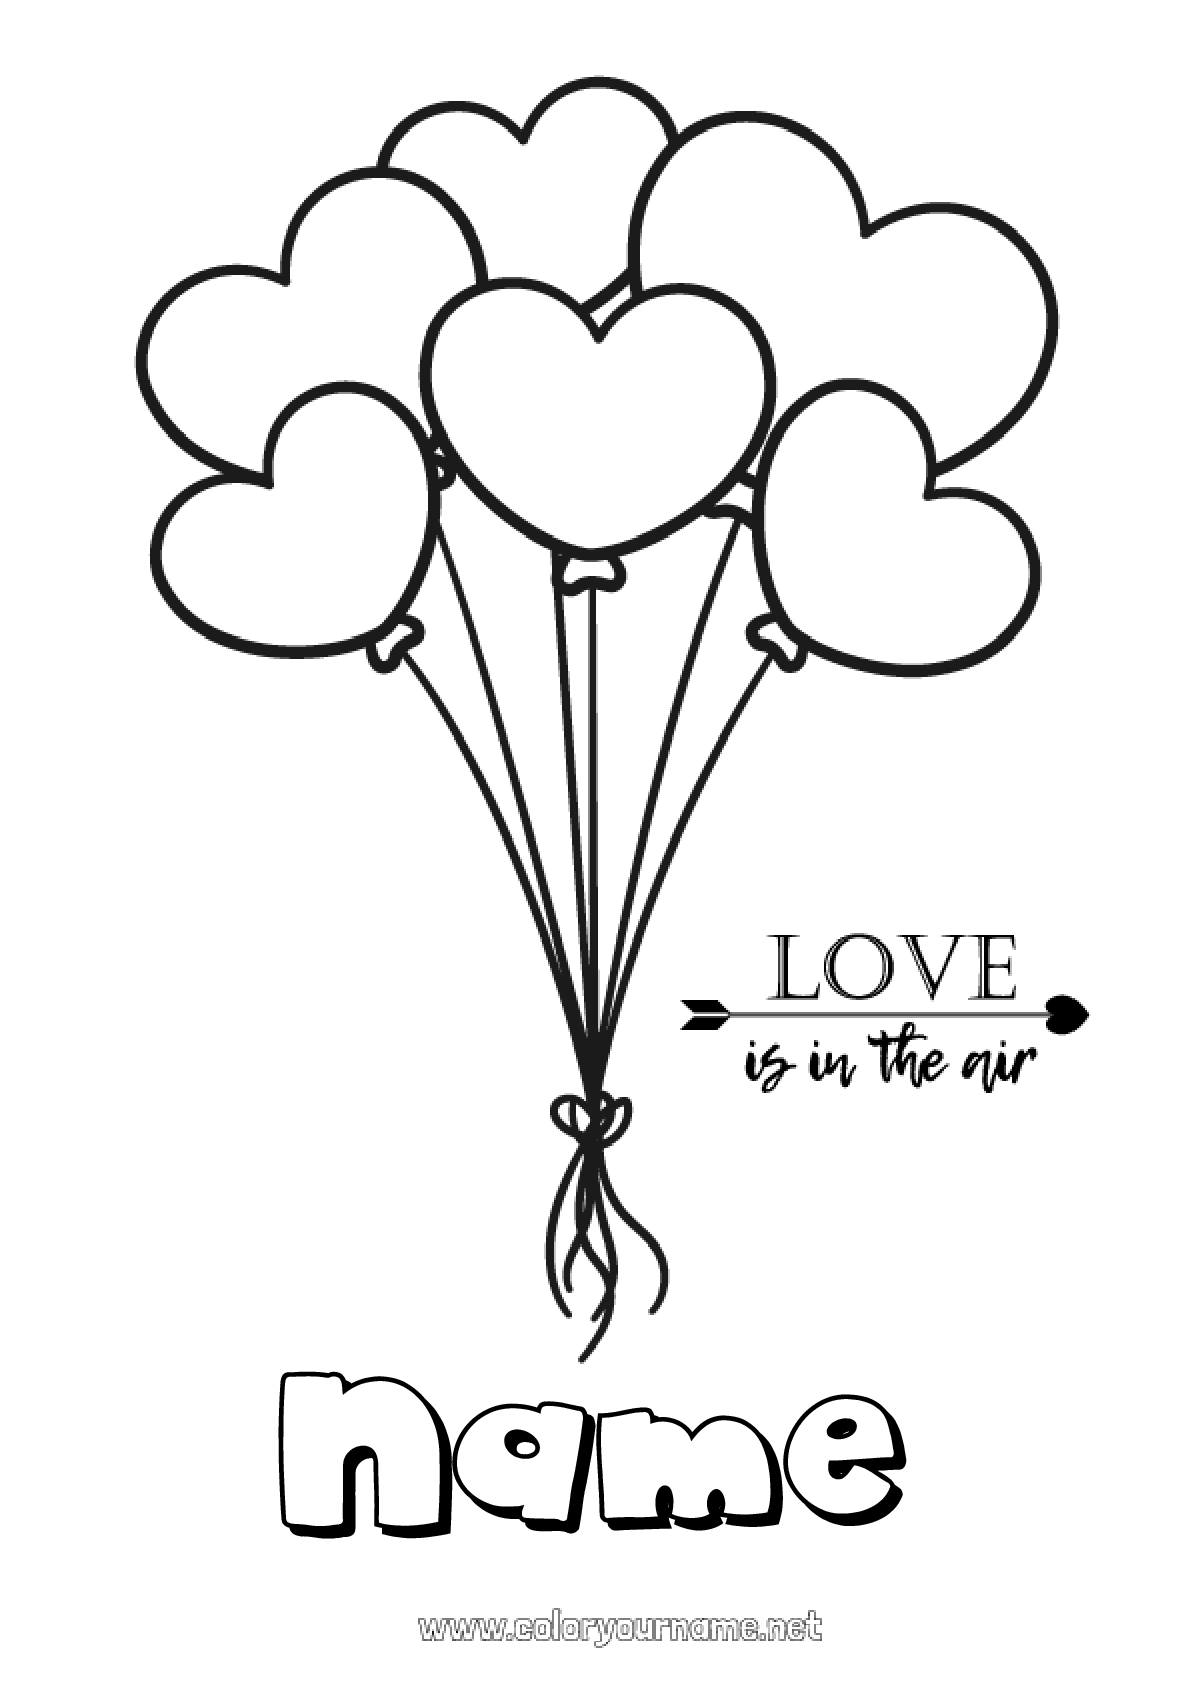 Coloring page No.985 - Heart Balloons I love you